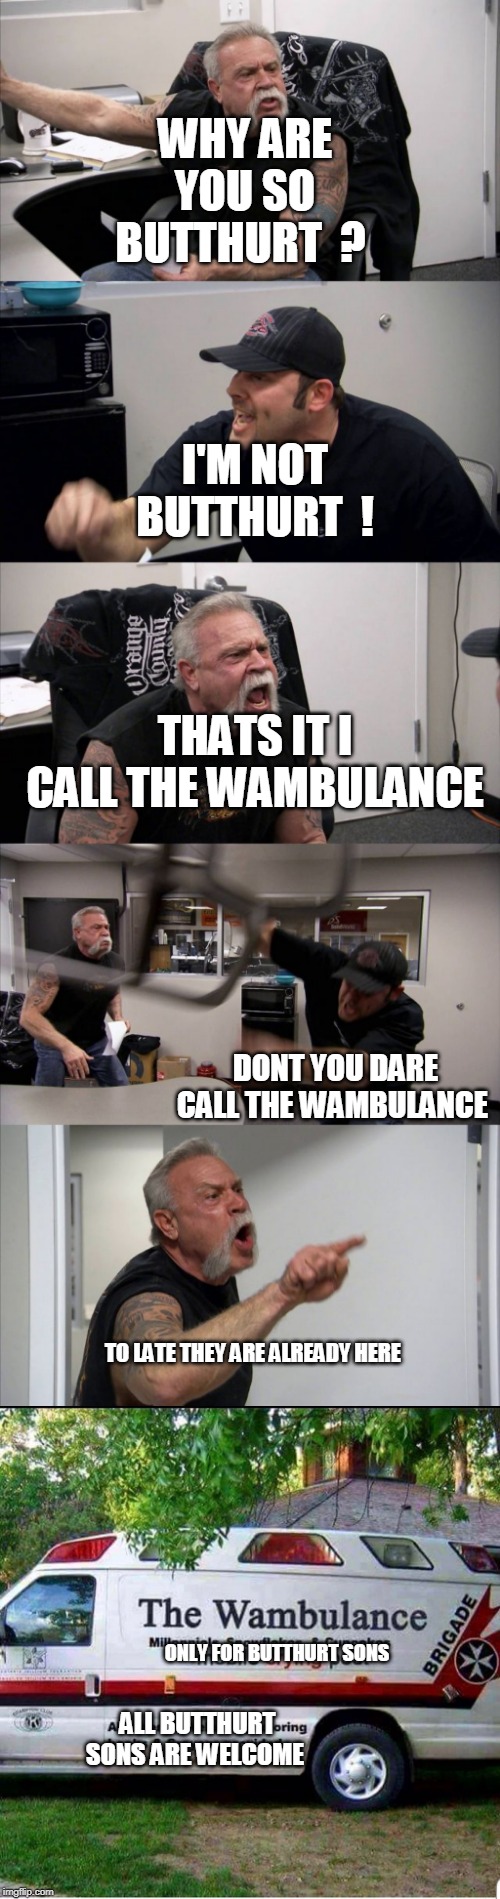 americian Butthurt chopper | WHY ARE YOU SO BUTTHURT  ? I'M NOT BUTTHURT  ! THATS IT I CALL THE WAMBULANCE; DONT YOU DARE CALL THE WAMBULANCE; TO LATE THEY ARE ALREADY HERE; ONLY FOR BUTTHURT SONS; ALL BUTTHURT SONS ARE WELCOME | image tagged in memes,american chopper argument,butthurt | made w/ Imgflip meme maker